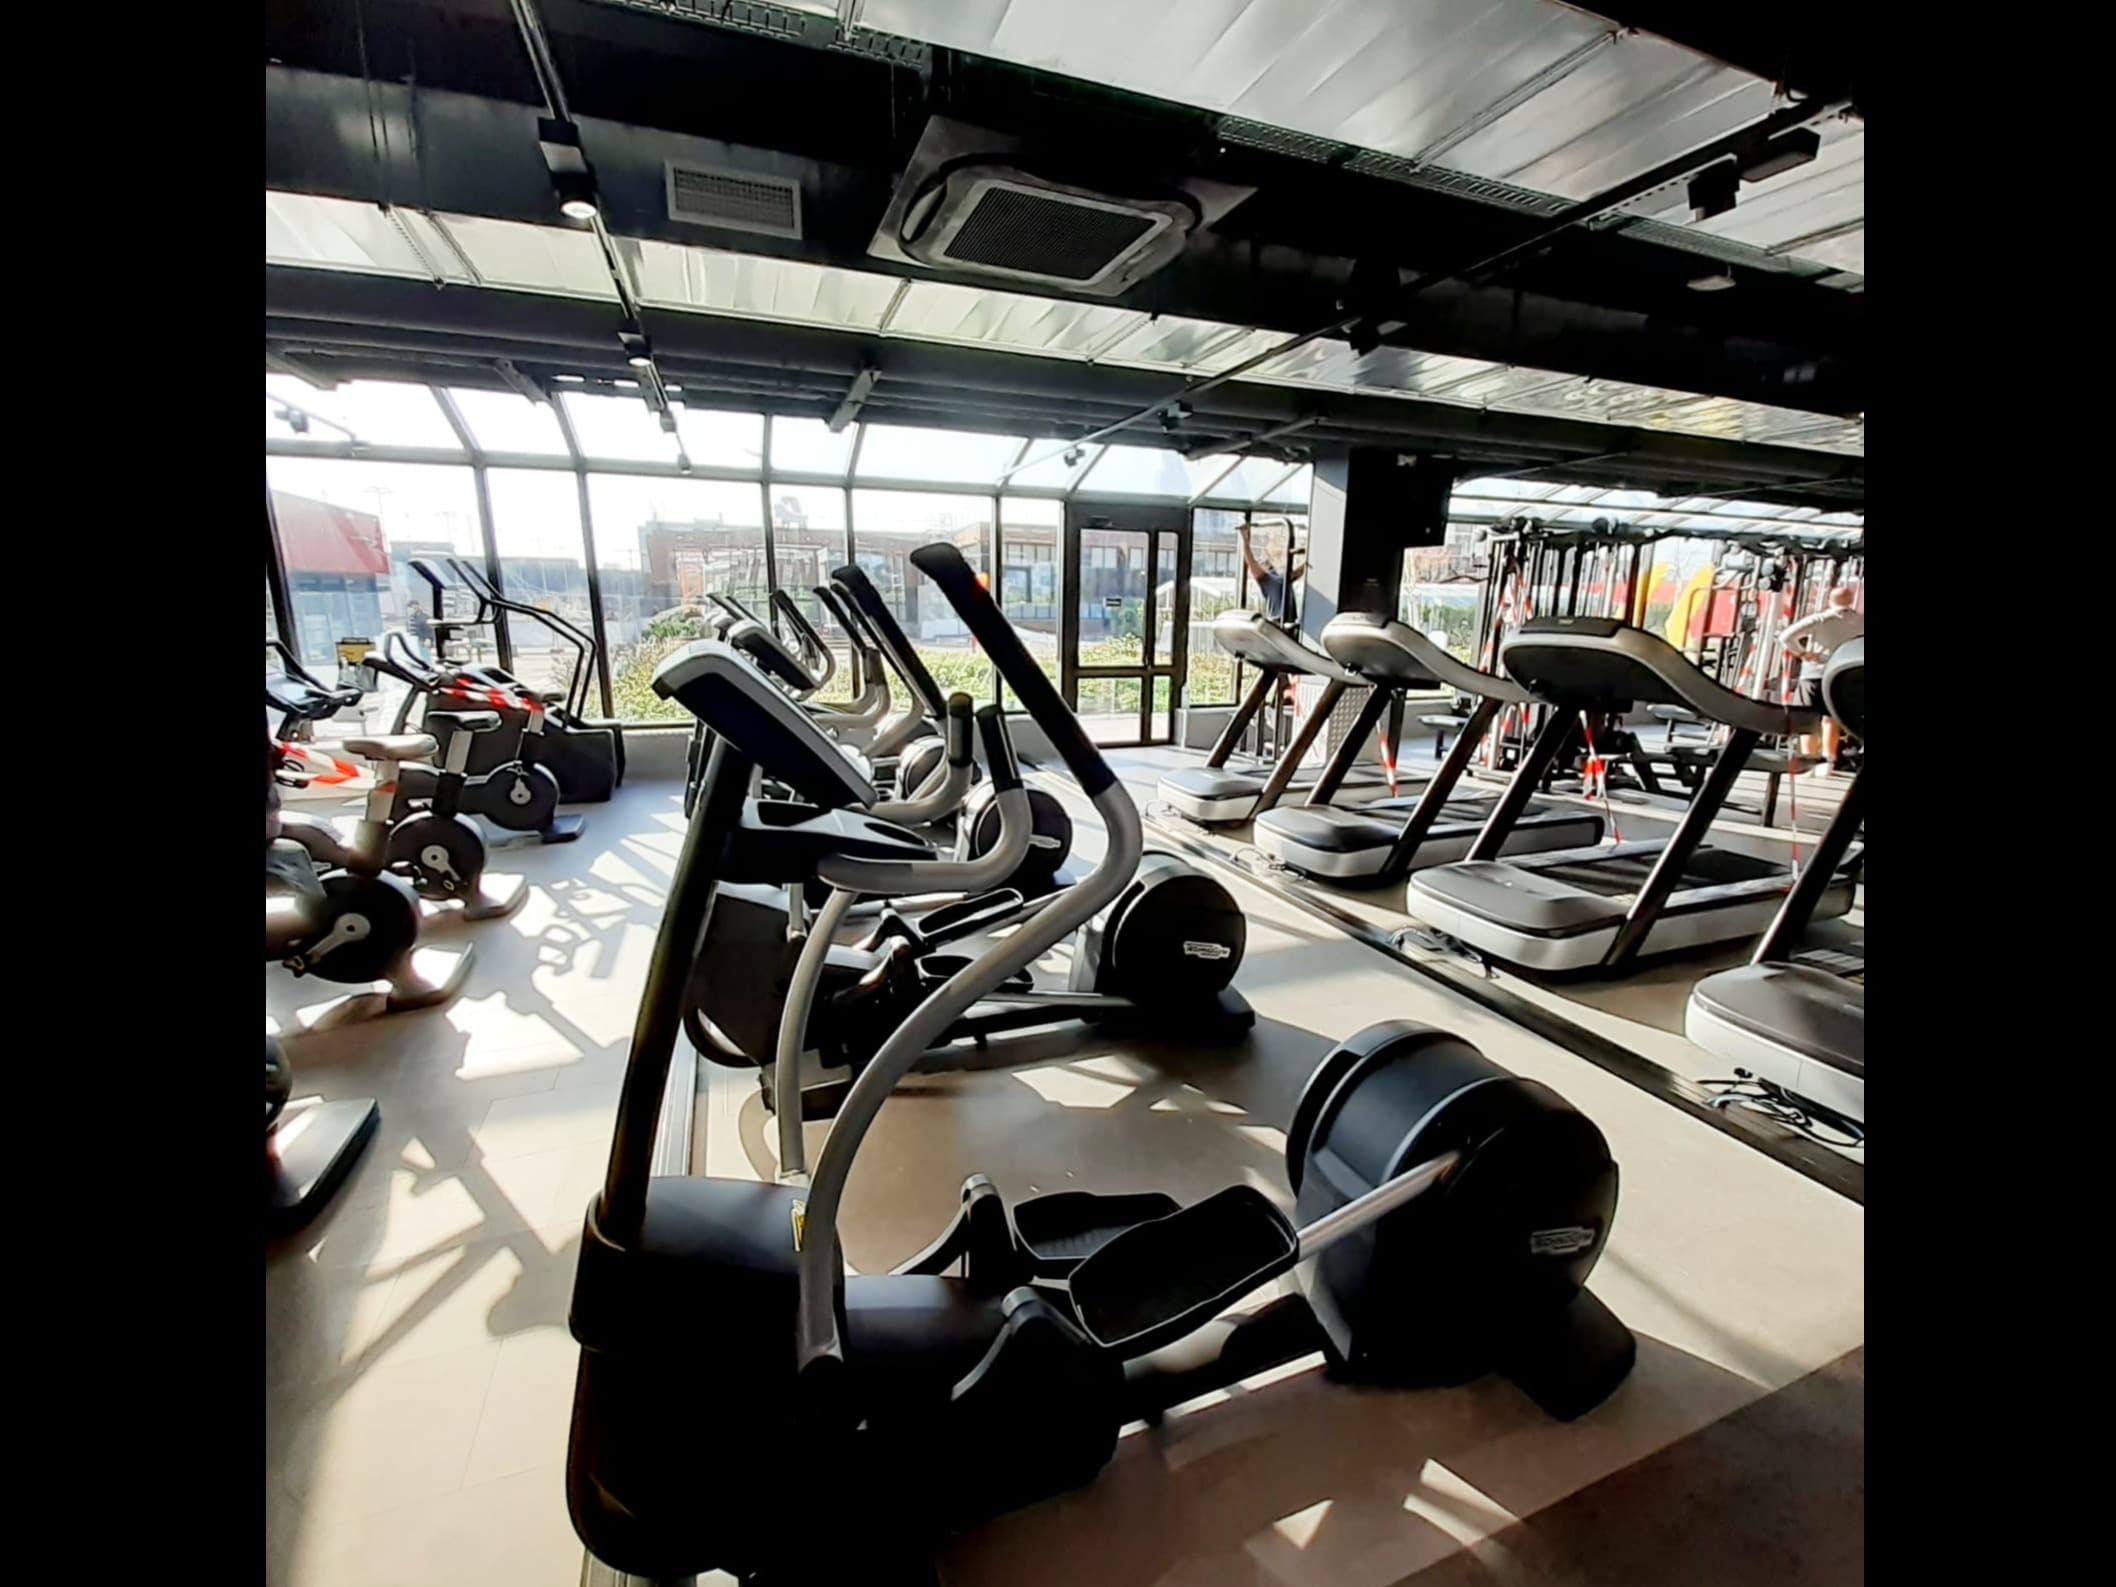 Fitness Park Cergy - Les 3 Fontaines